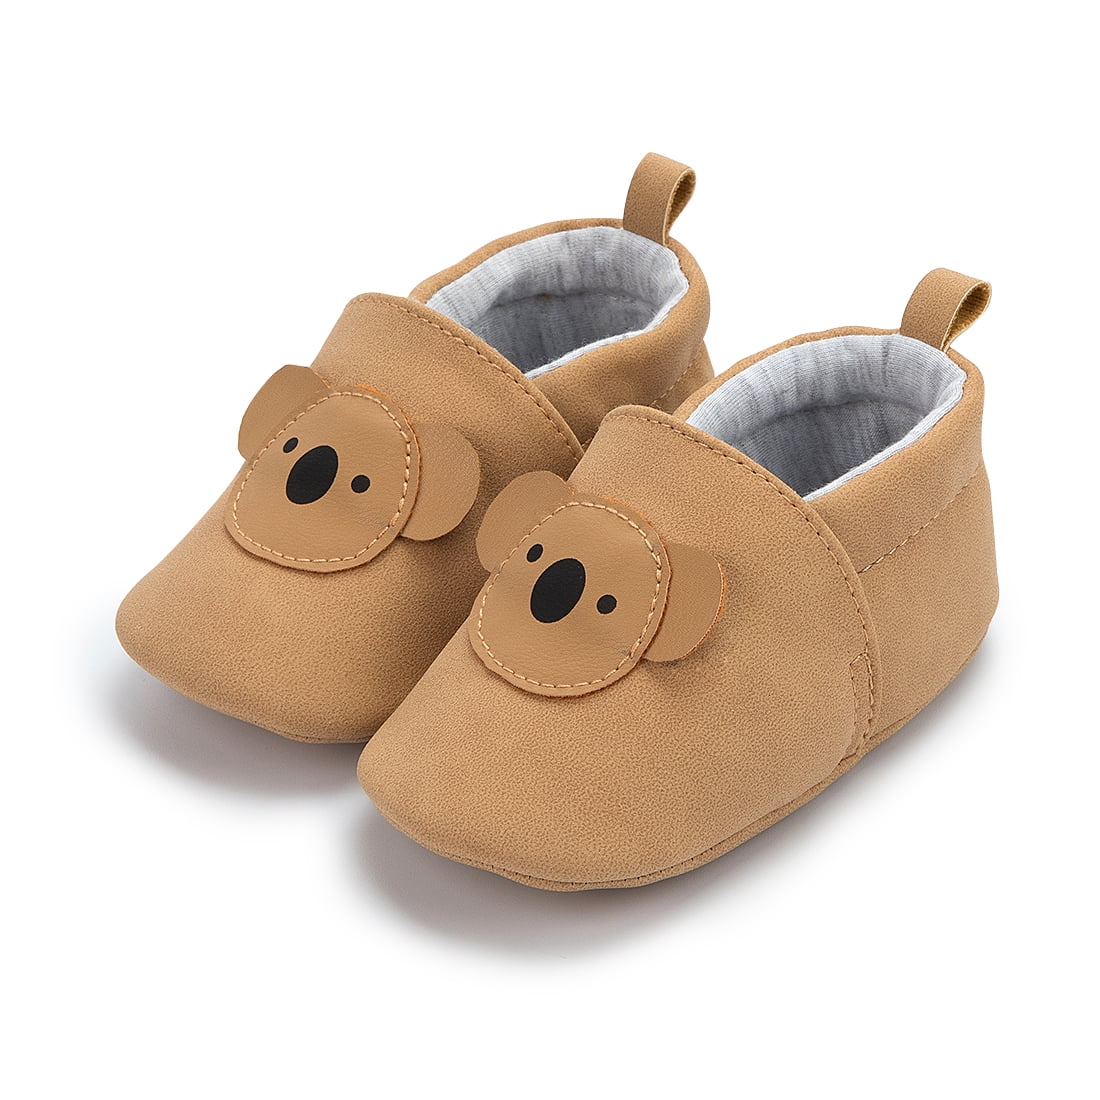 Breathable and Comfortable Fabric for Indoor Outdoor Gavena Baby Slipper Shoes Slip on Baby Kids First Walking Shoes with No-Slip Rubber Soft Sole